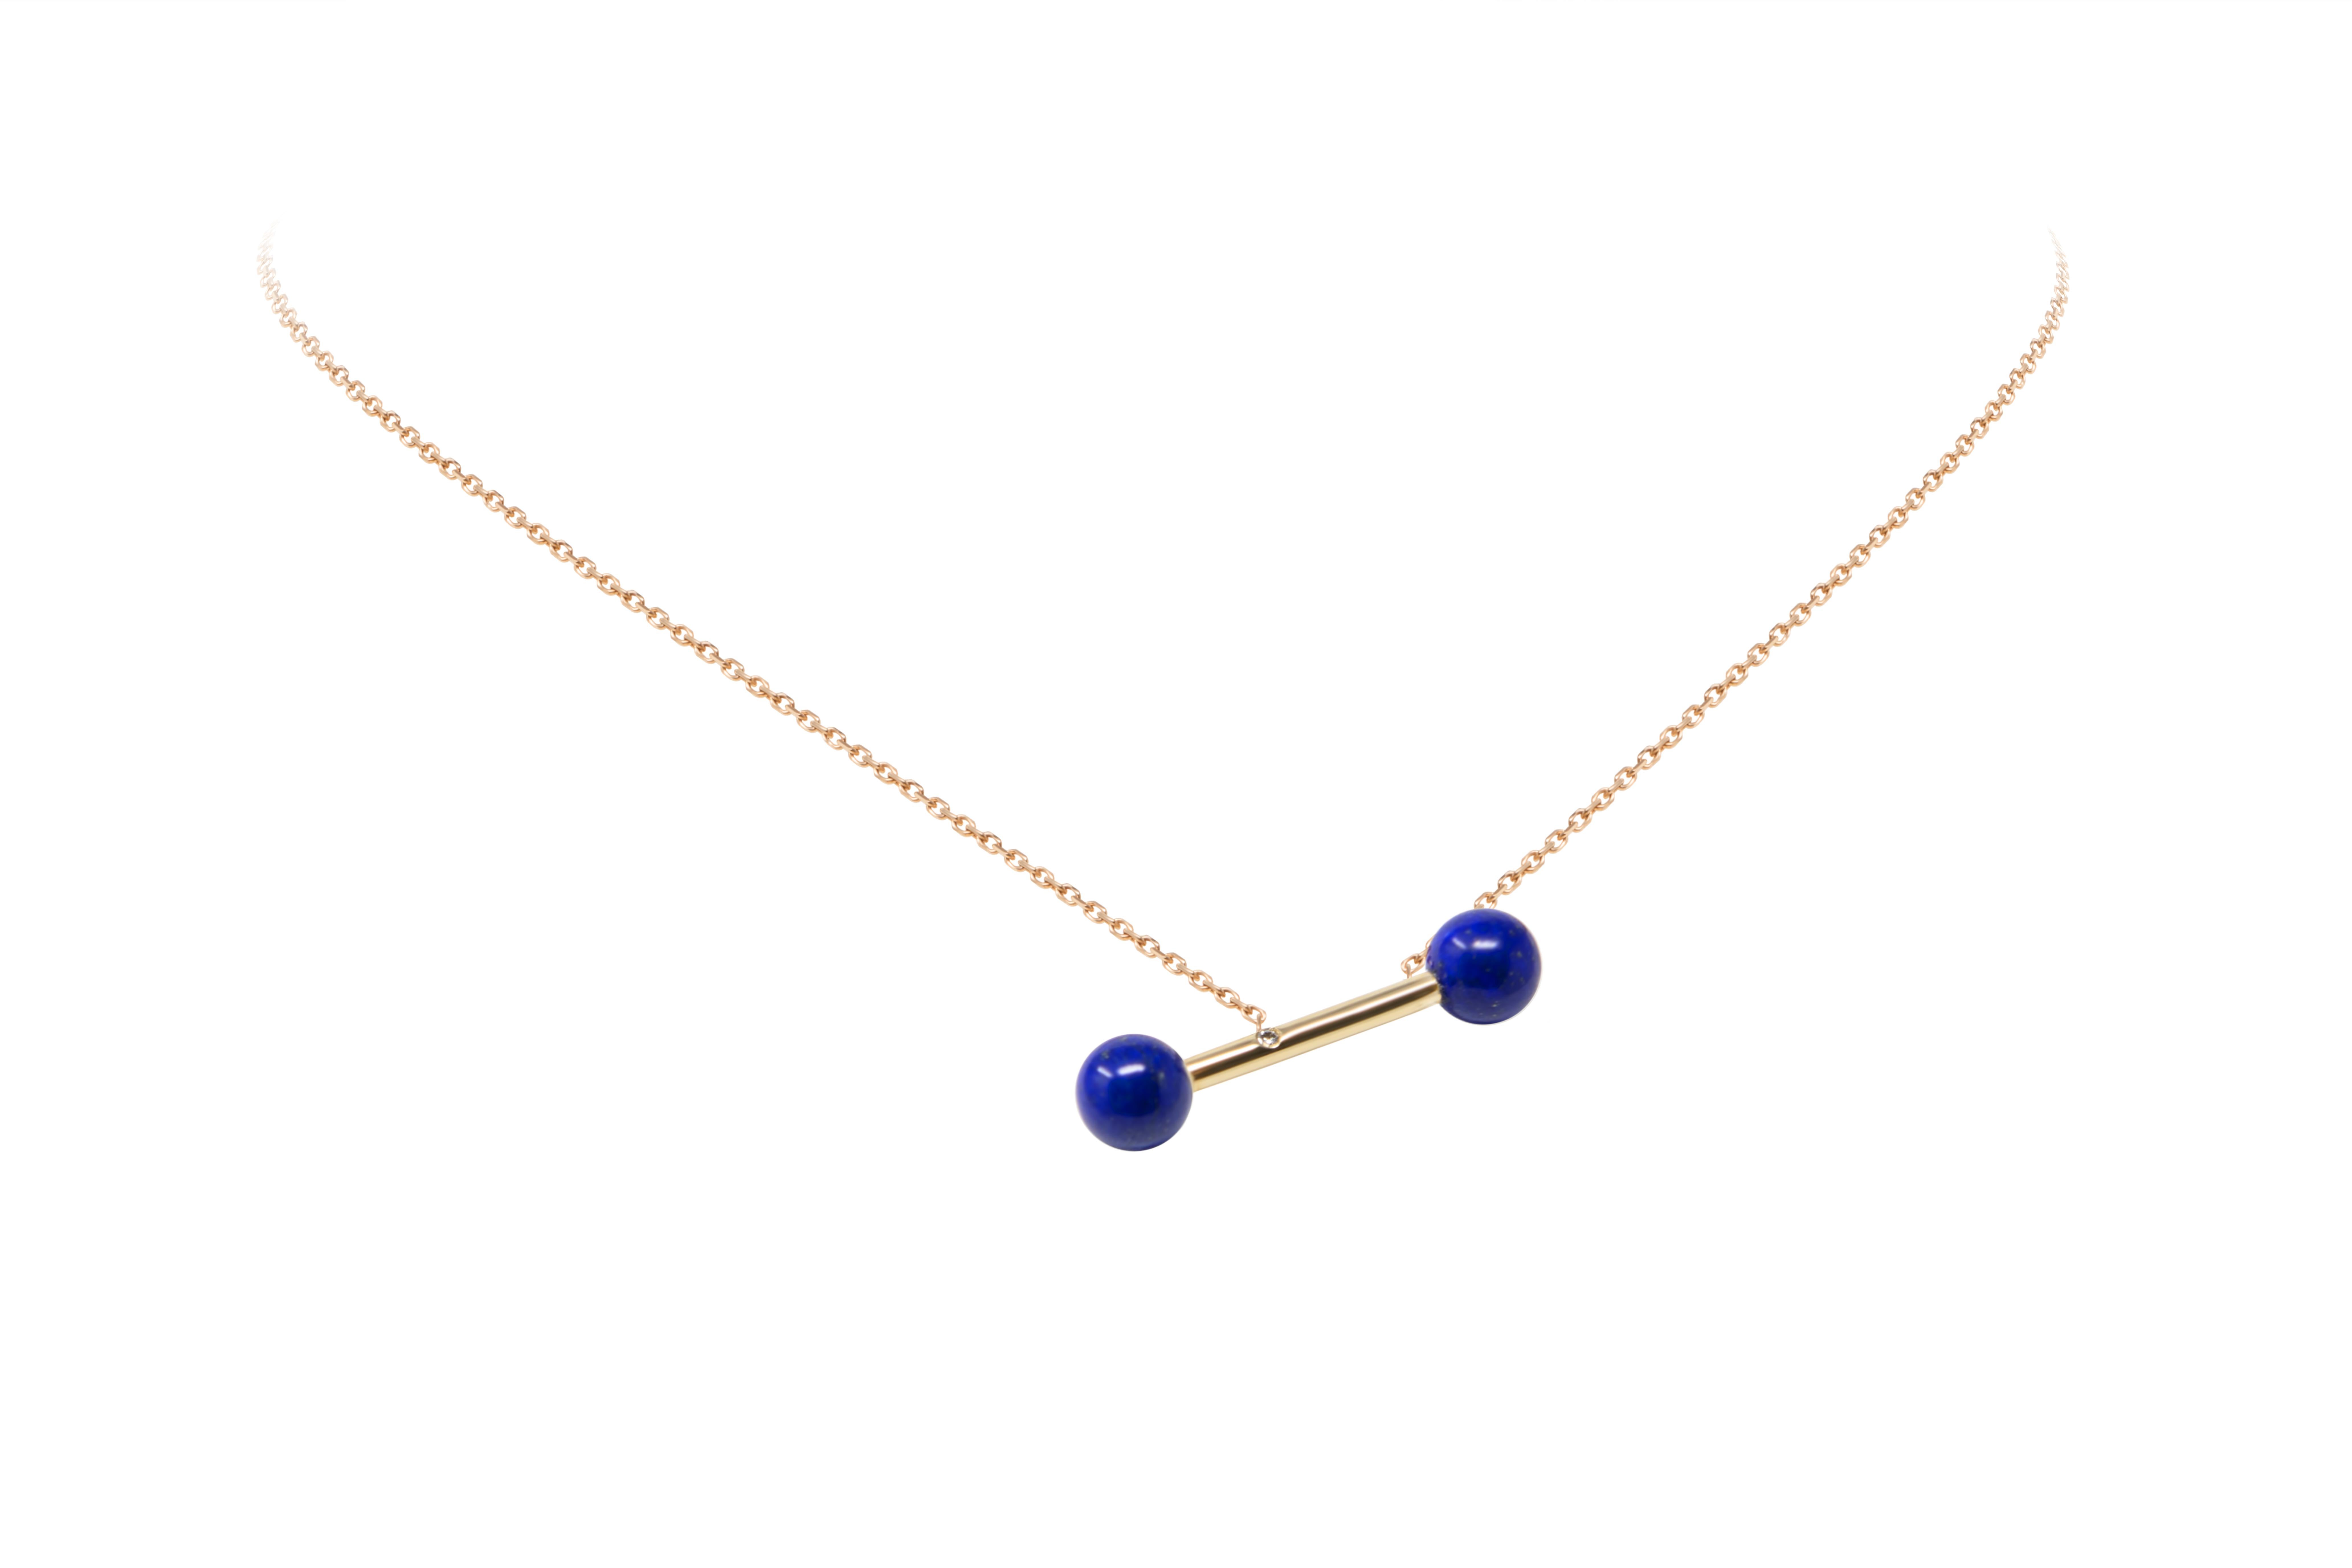 18 Carat Yellow Gold Lapis Lazuli Diamond Pendant.
HAND CARVED STONES made from a Specific Unique Designed. HANDCRAFTED IN FRANCE.
The Designer, Bénédicte, decided to produce all her Creations in her Country of Origin, France, to Honor and Ensure